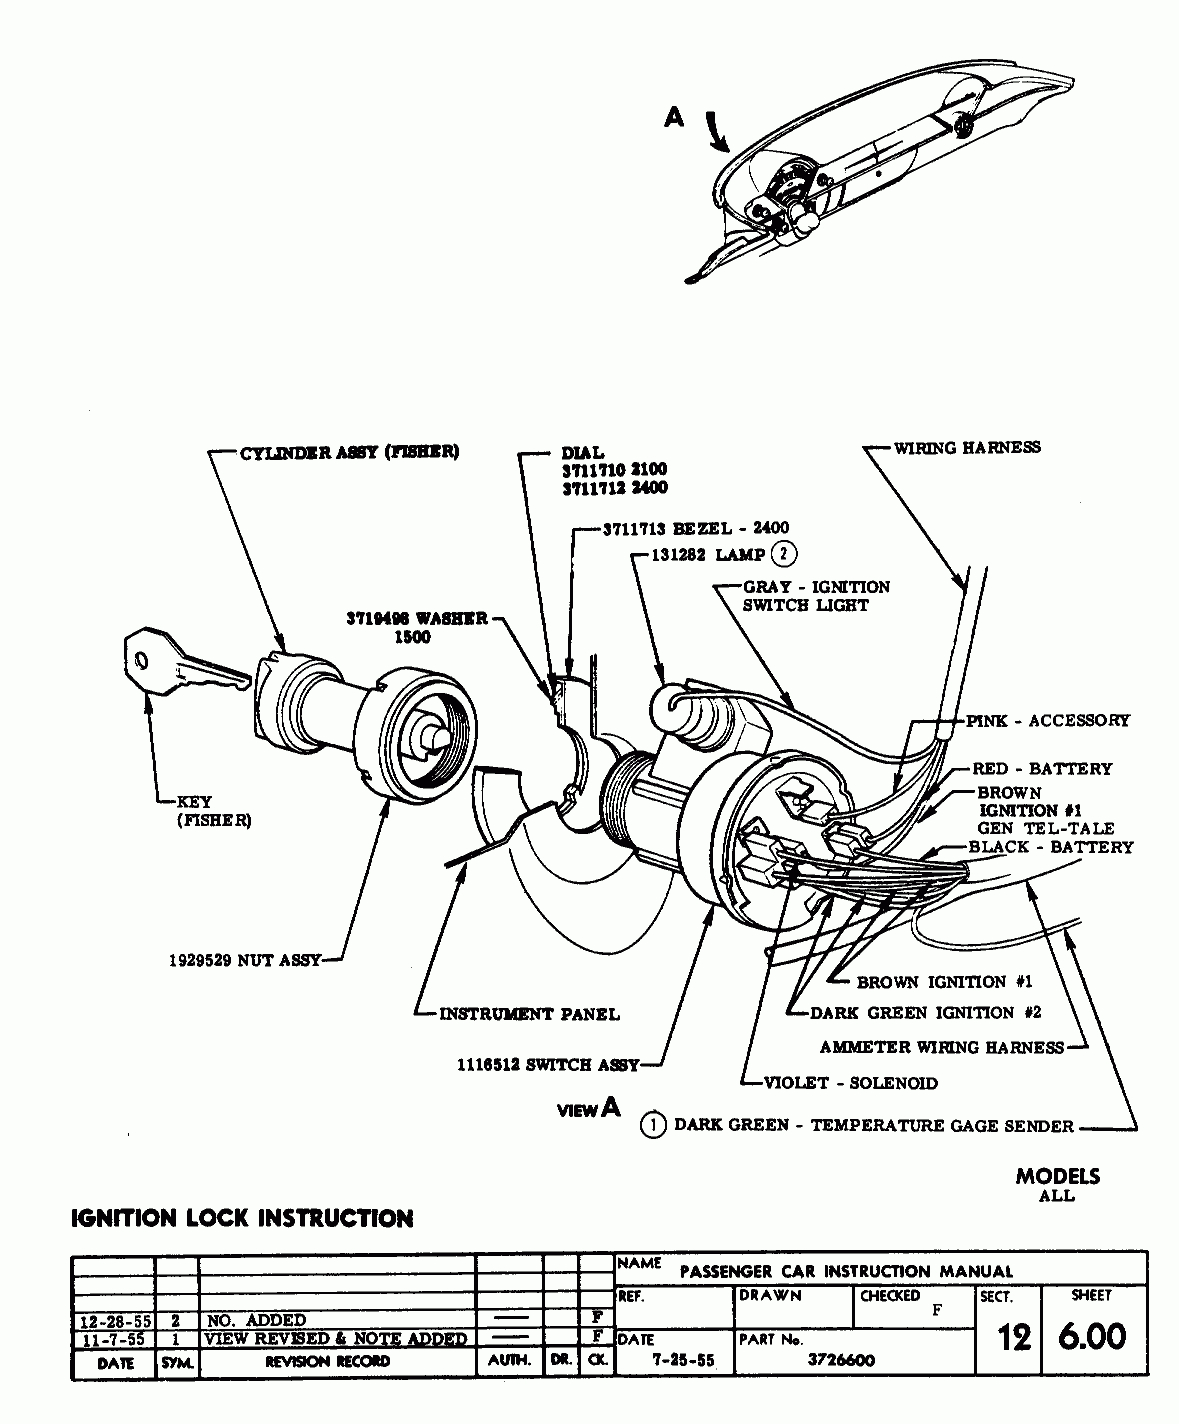 57 Chevy Ignition Switch Wiring Diagram - Wiring Diagrams Hubs - Gm Ignition Switch Wiring Diagram